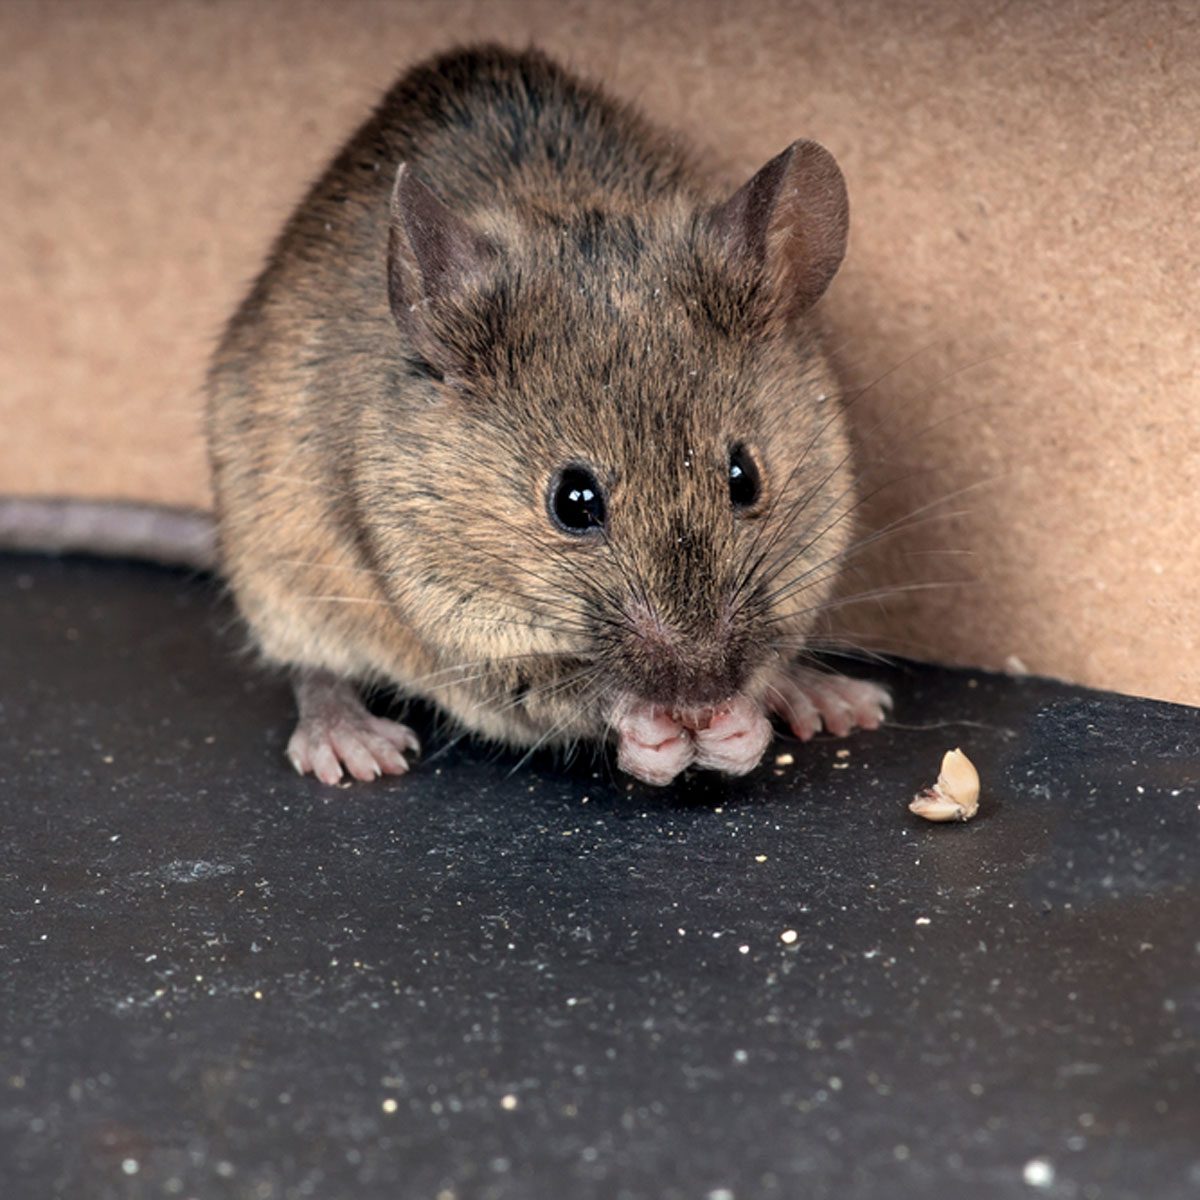 Our Mouse-Trapping Philosophy